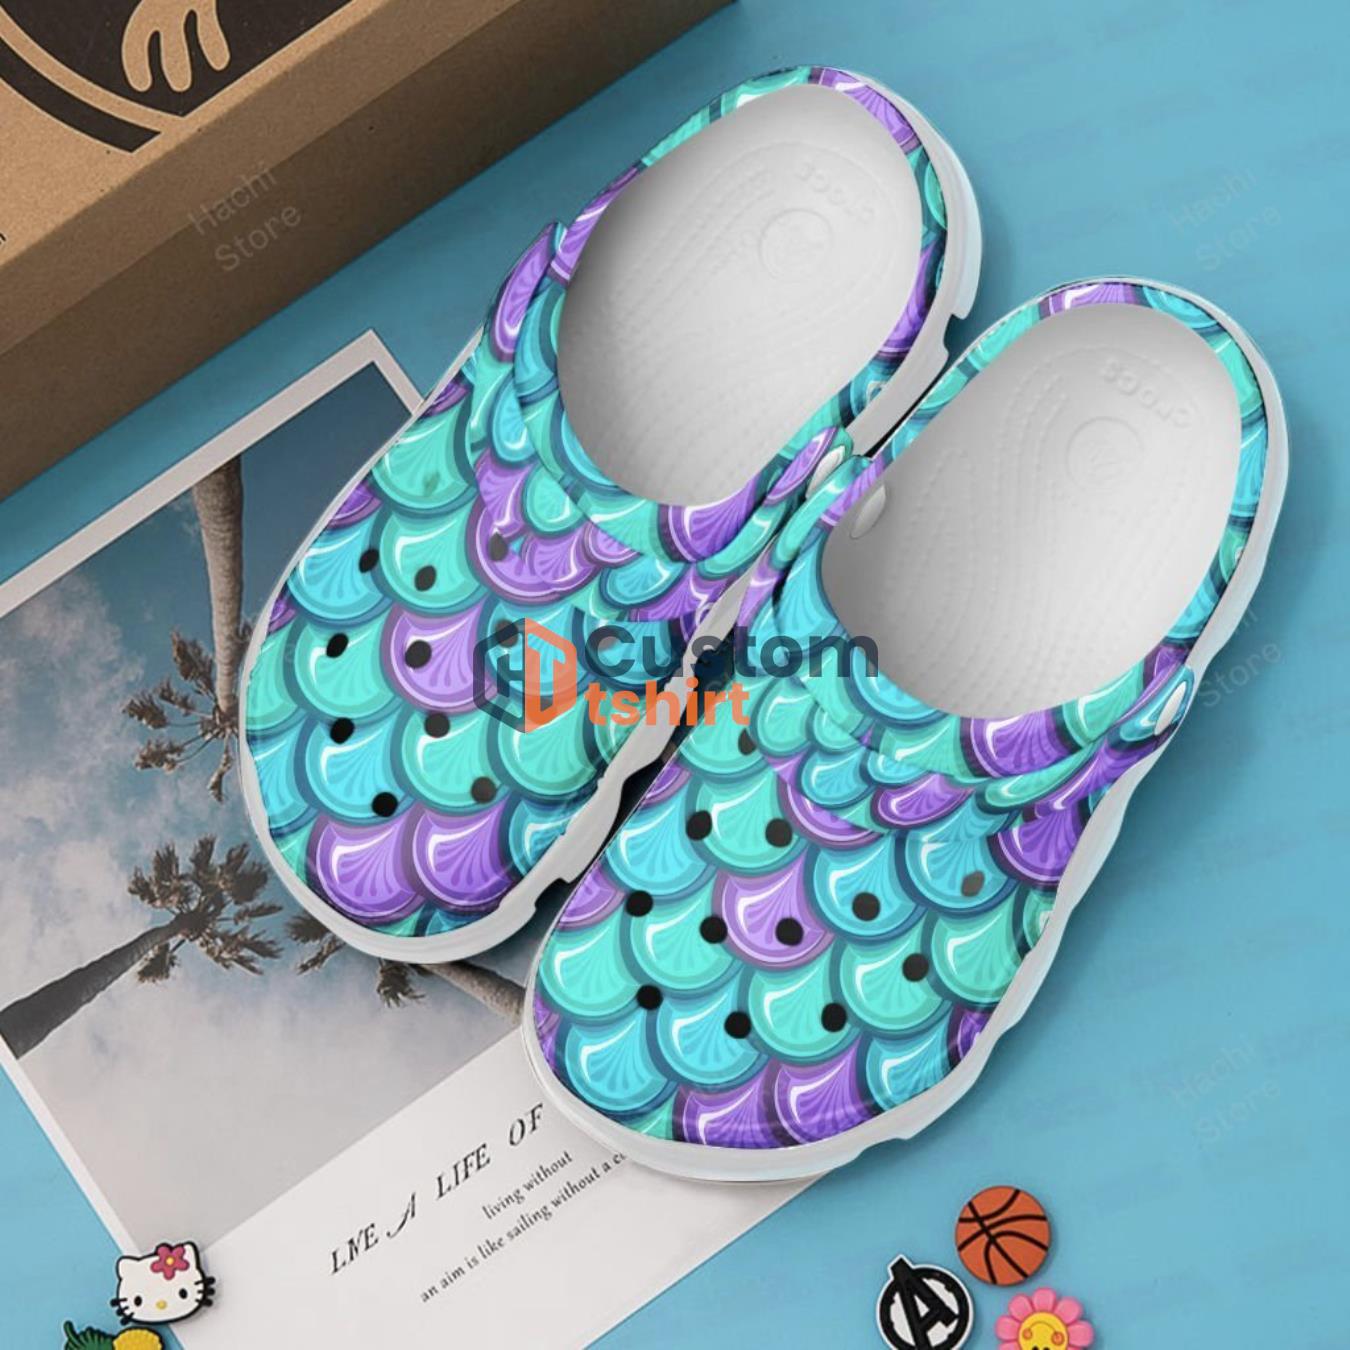 Mermaid Clog Shoes - Mermaid Fins Colorful Clog Shoes Product Photo 3 Product photo 2